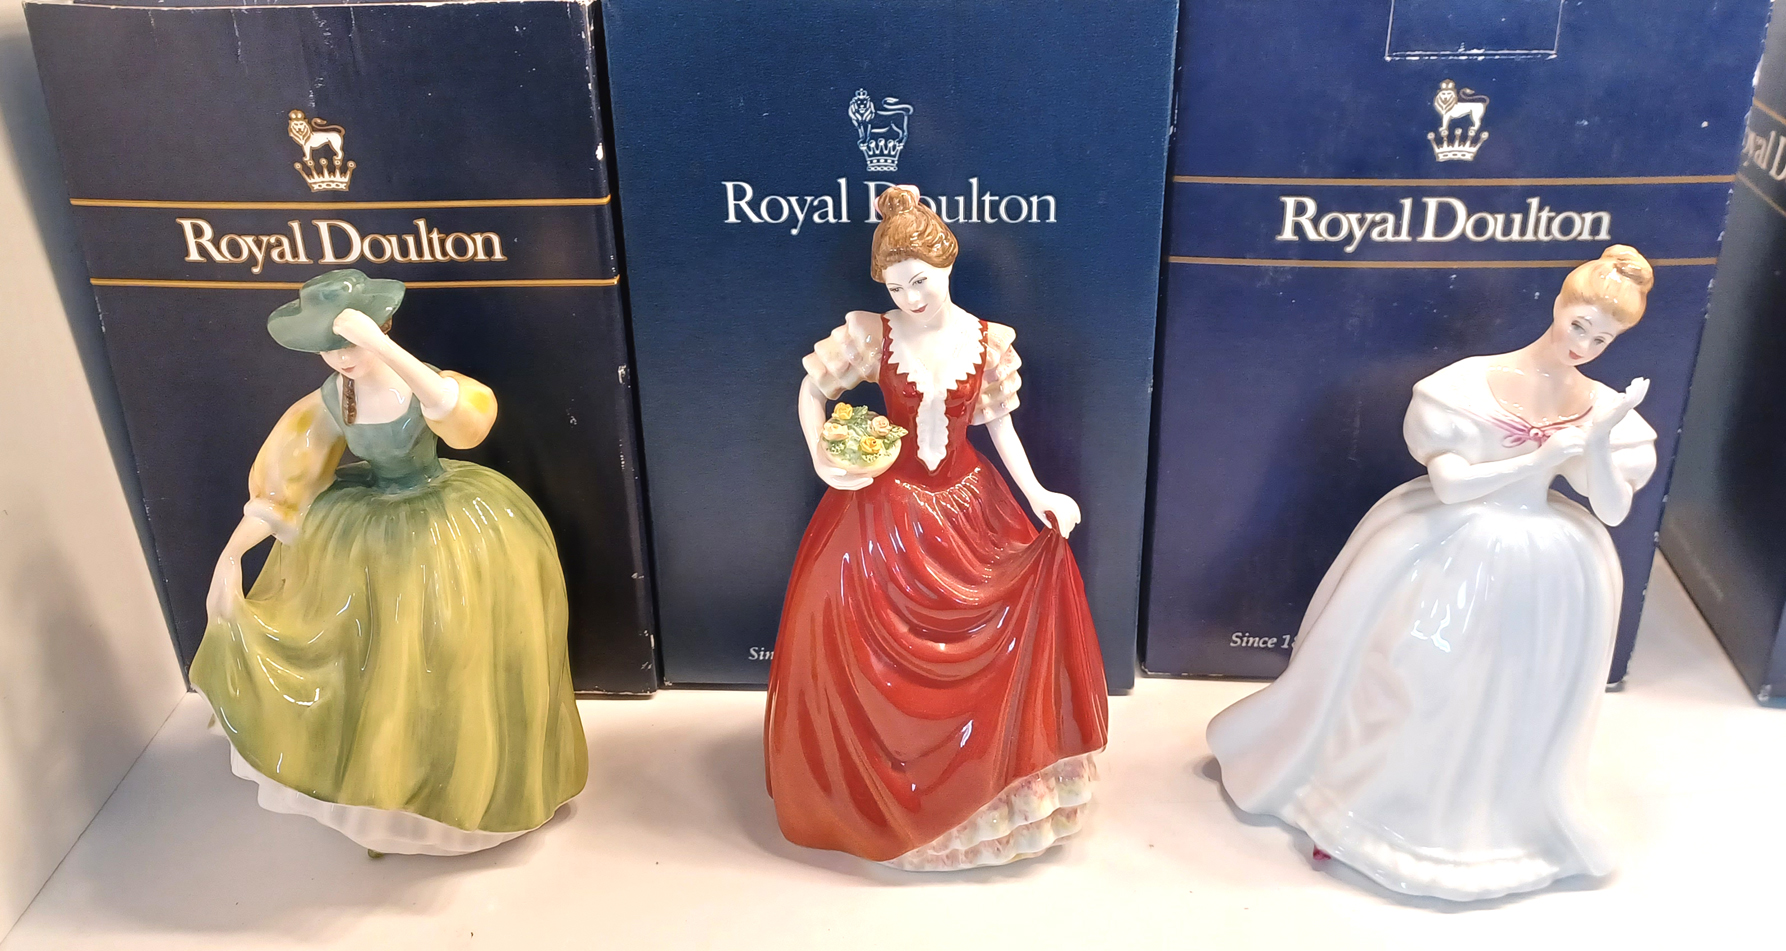 3 ROYAL DOULTON LADIES FIGURINES BOXED - HN2309 BUTTERCUP, HN3886 HELEN AND HN2477 DENISE